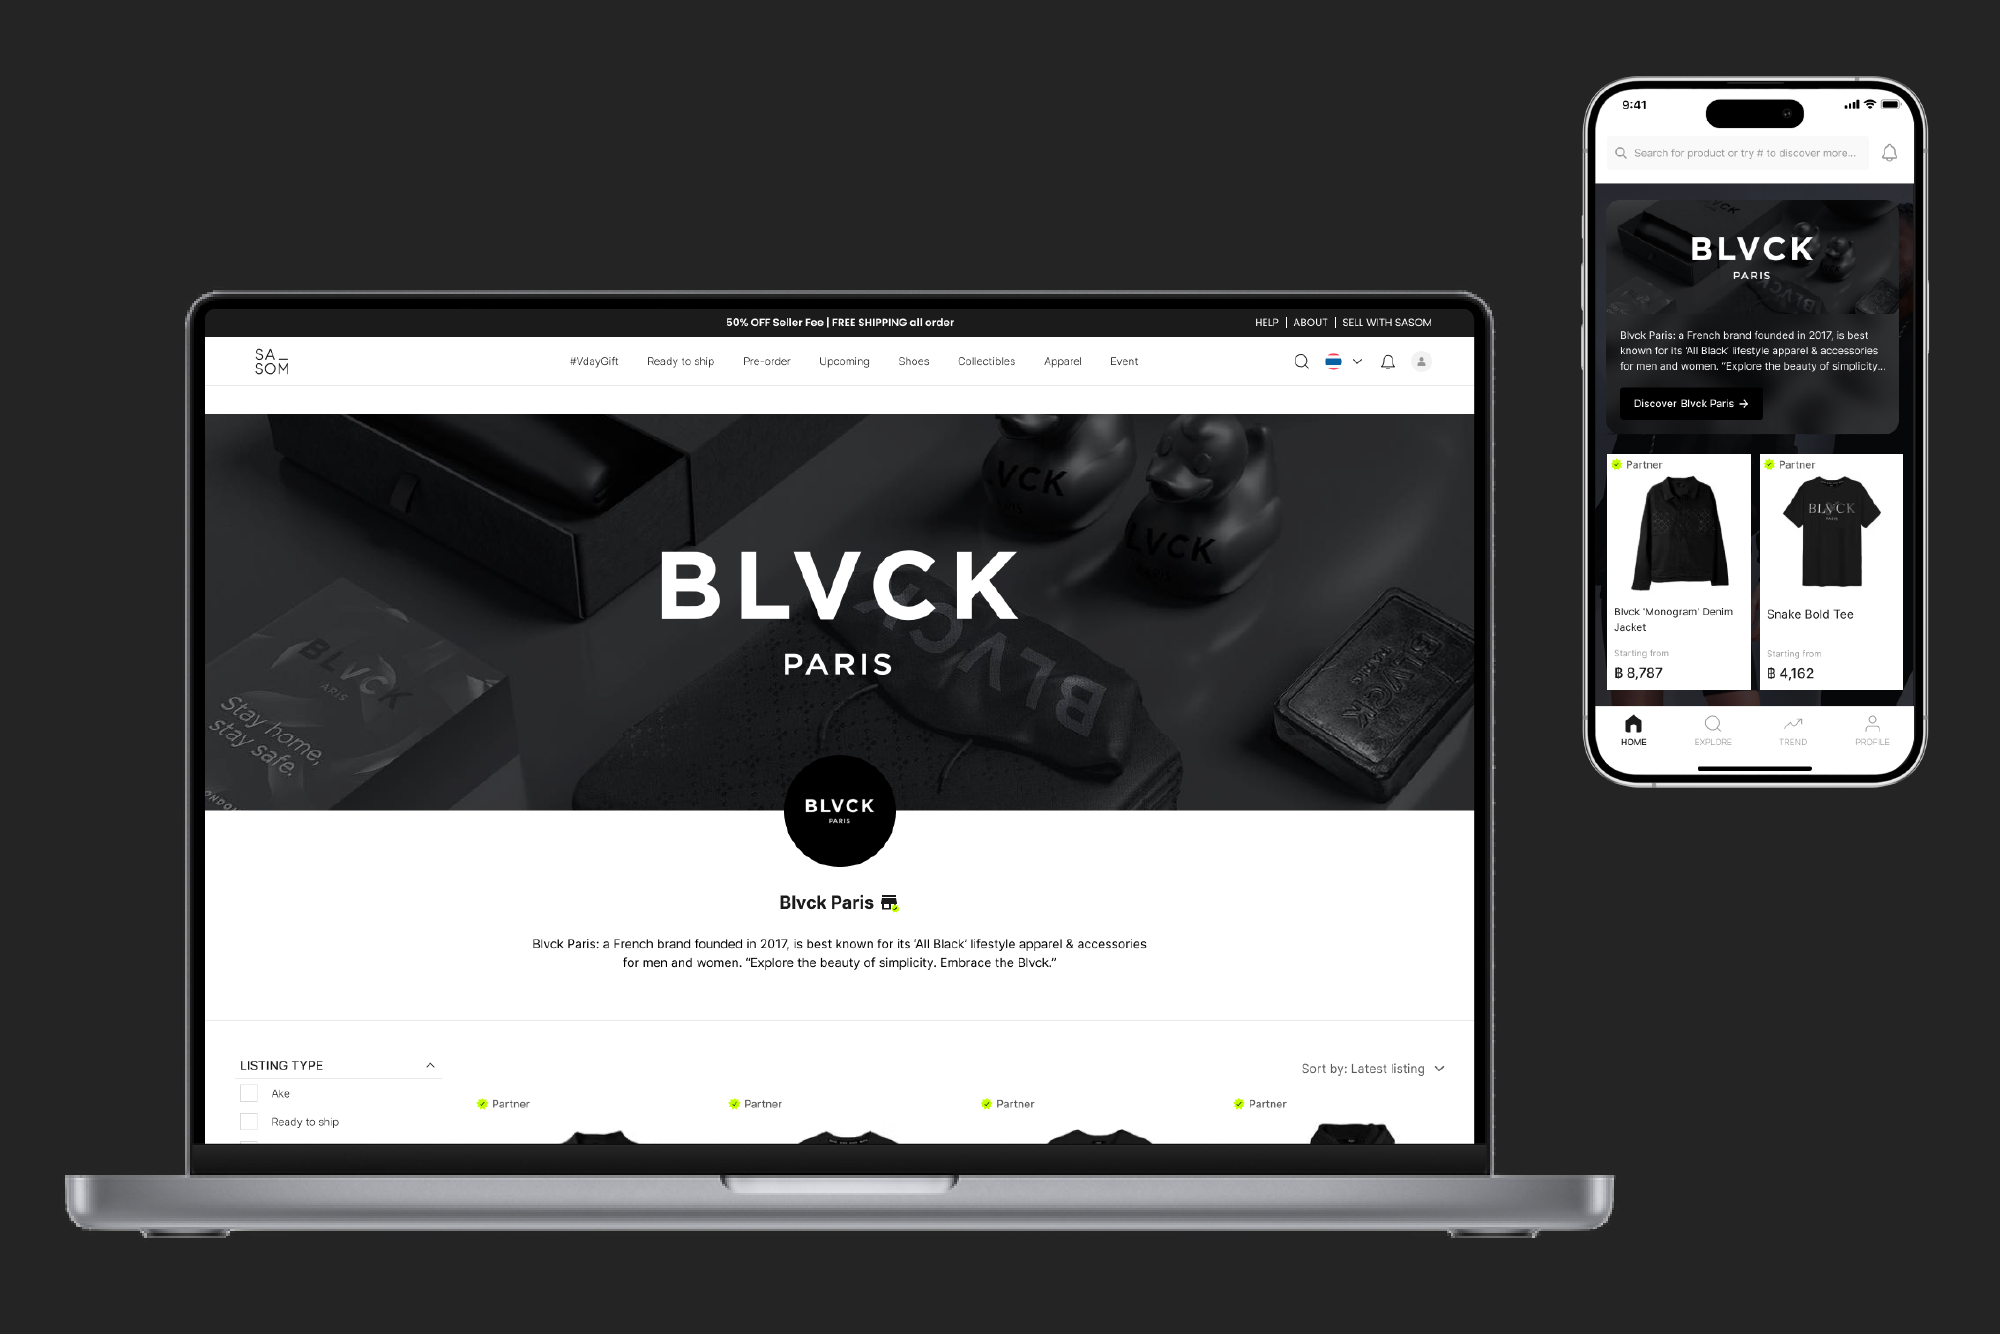 Official Partner : “BLVCK Paris” , The Best known for its ‘All Black’ fashion and lifestyle